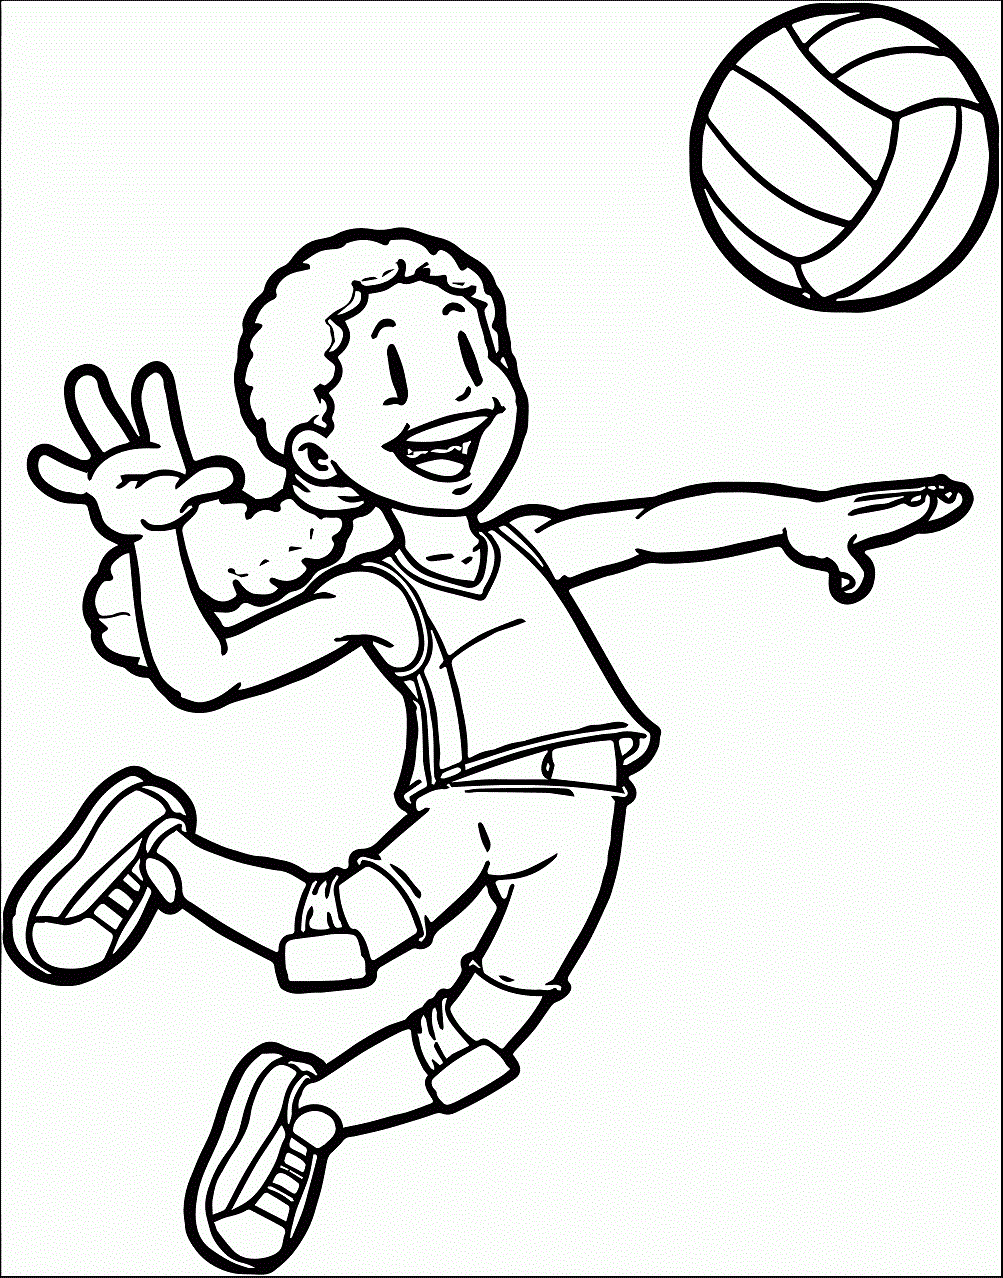 A Volleyball Player Coloring Page - Free Printable Coloring Pages for Kids